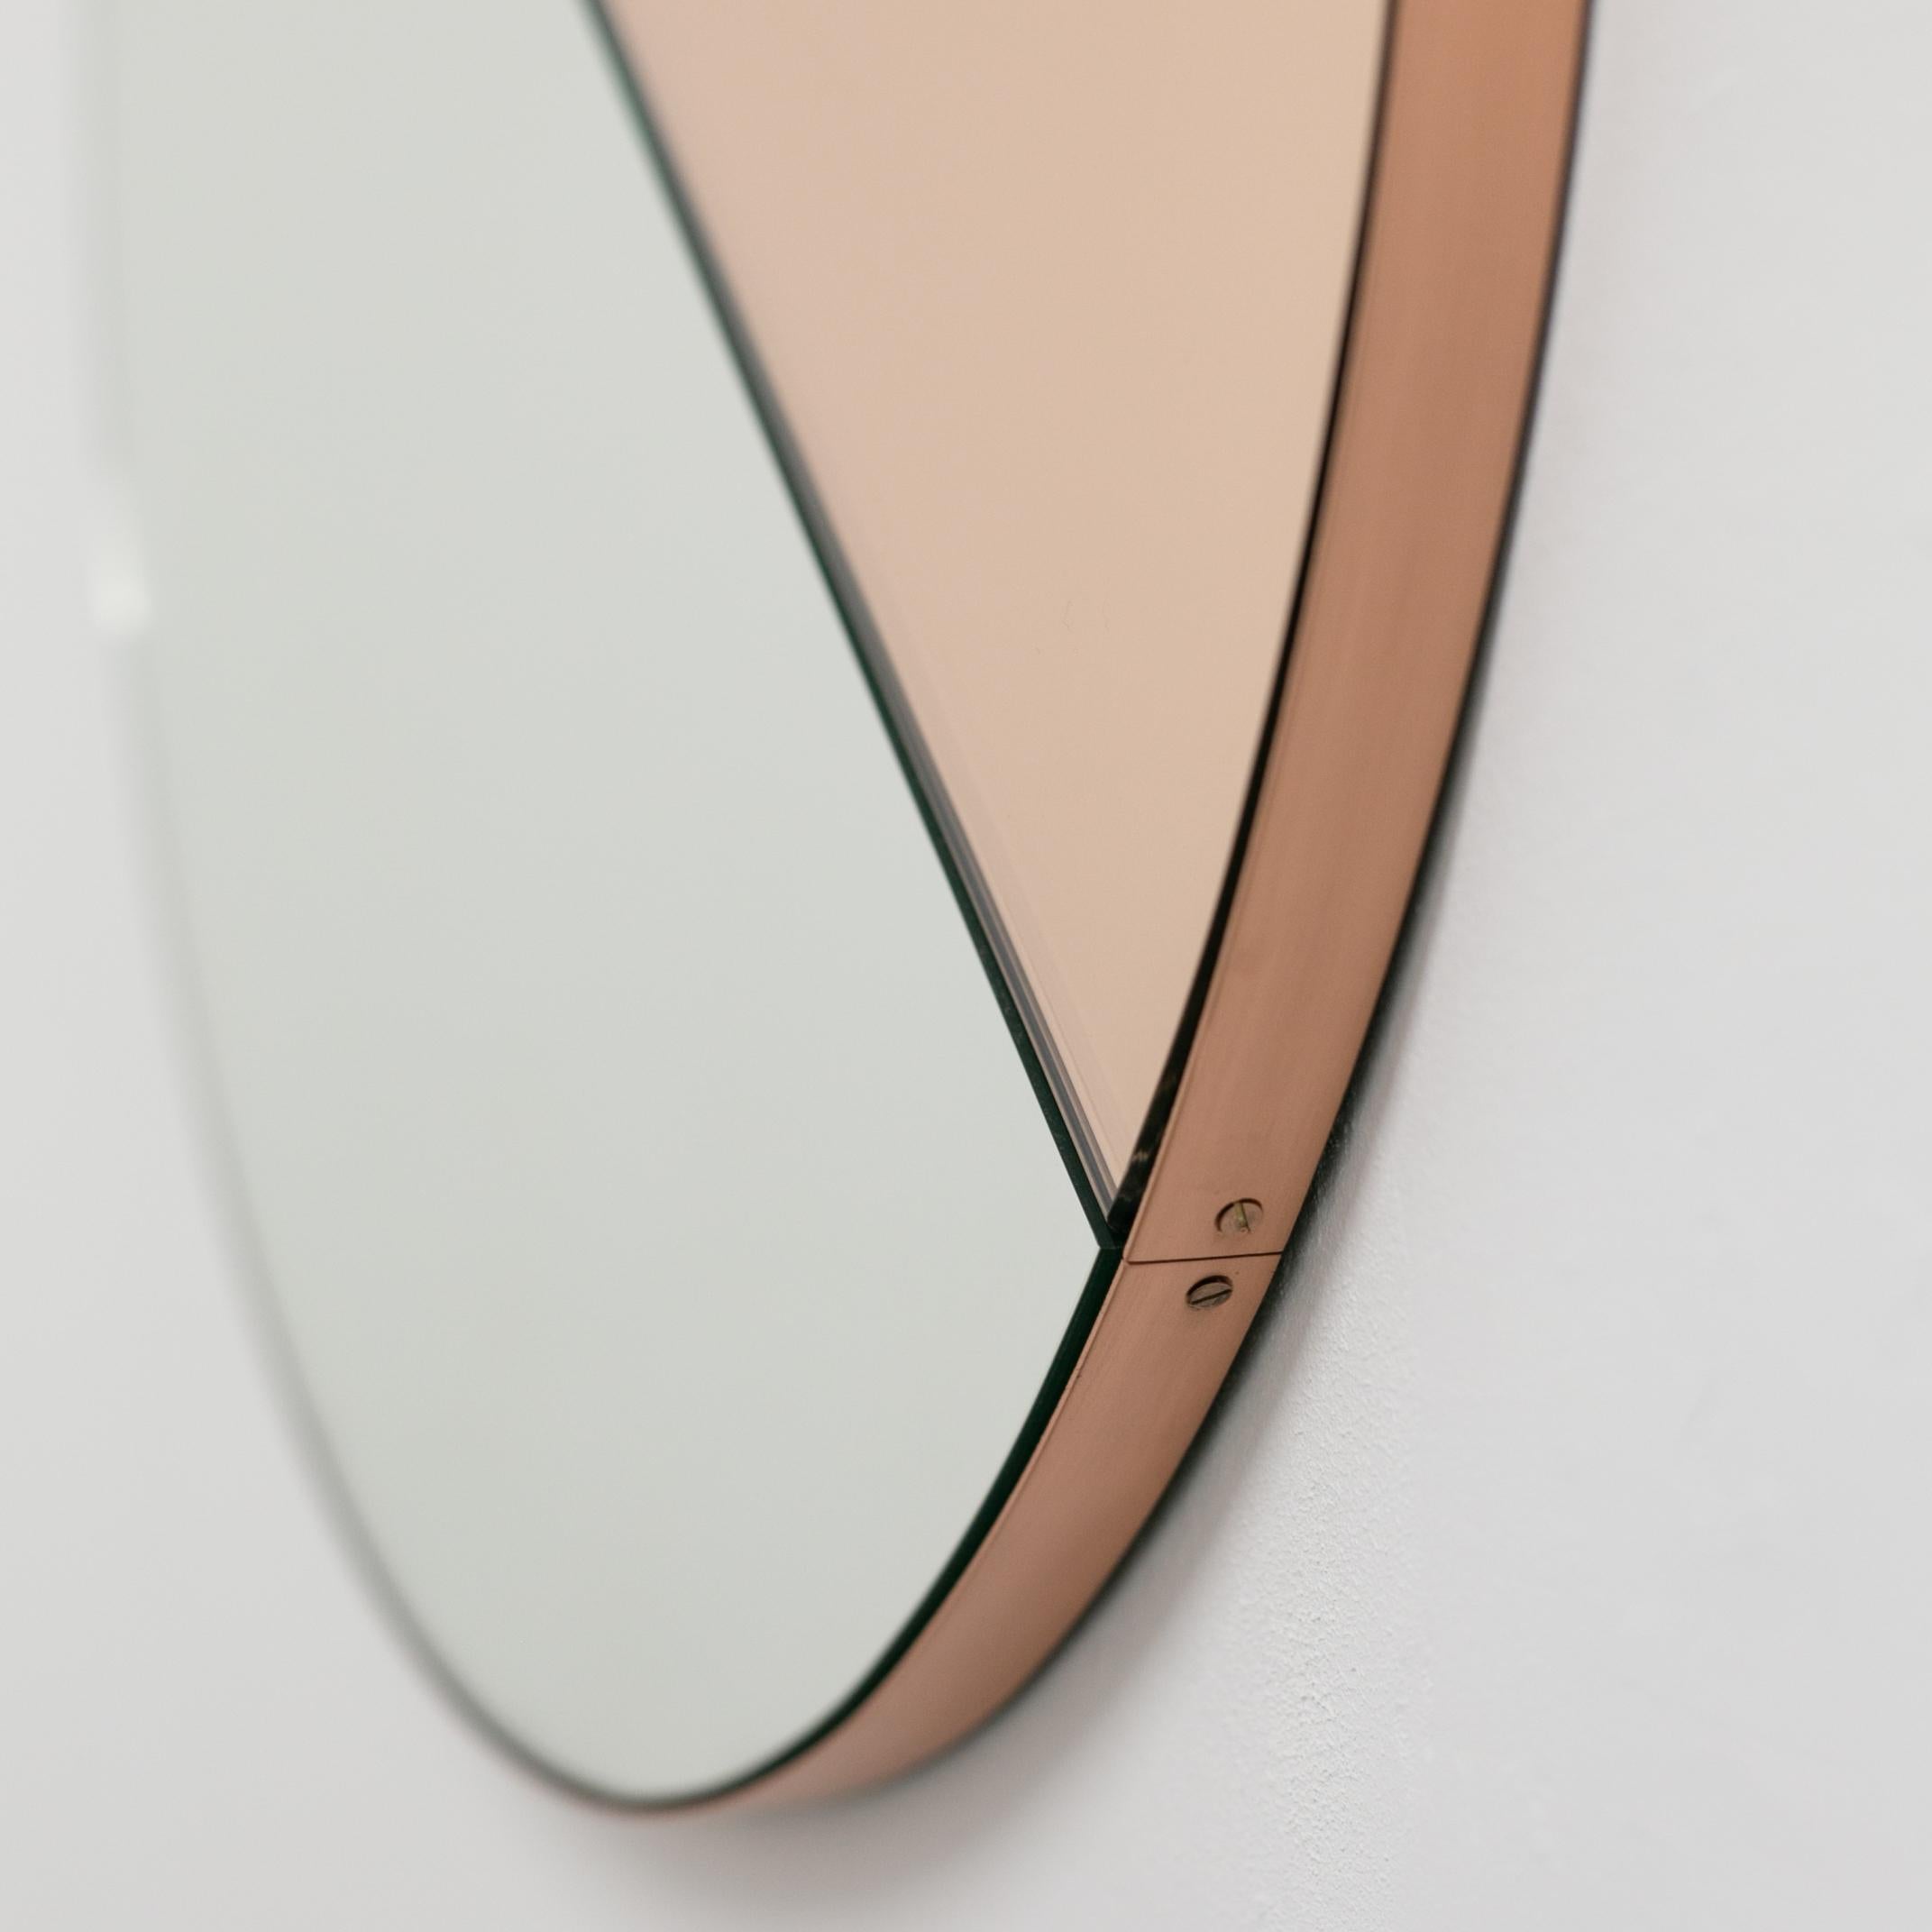 Orbis Dualis Mixed Rose Gold and Silver Round Mirror with Copper Frame, Medium For Sale 1